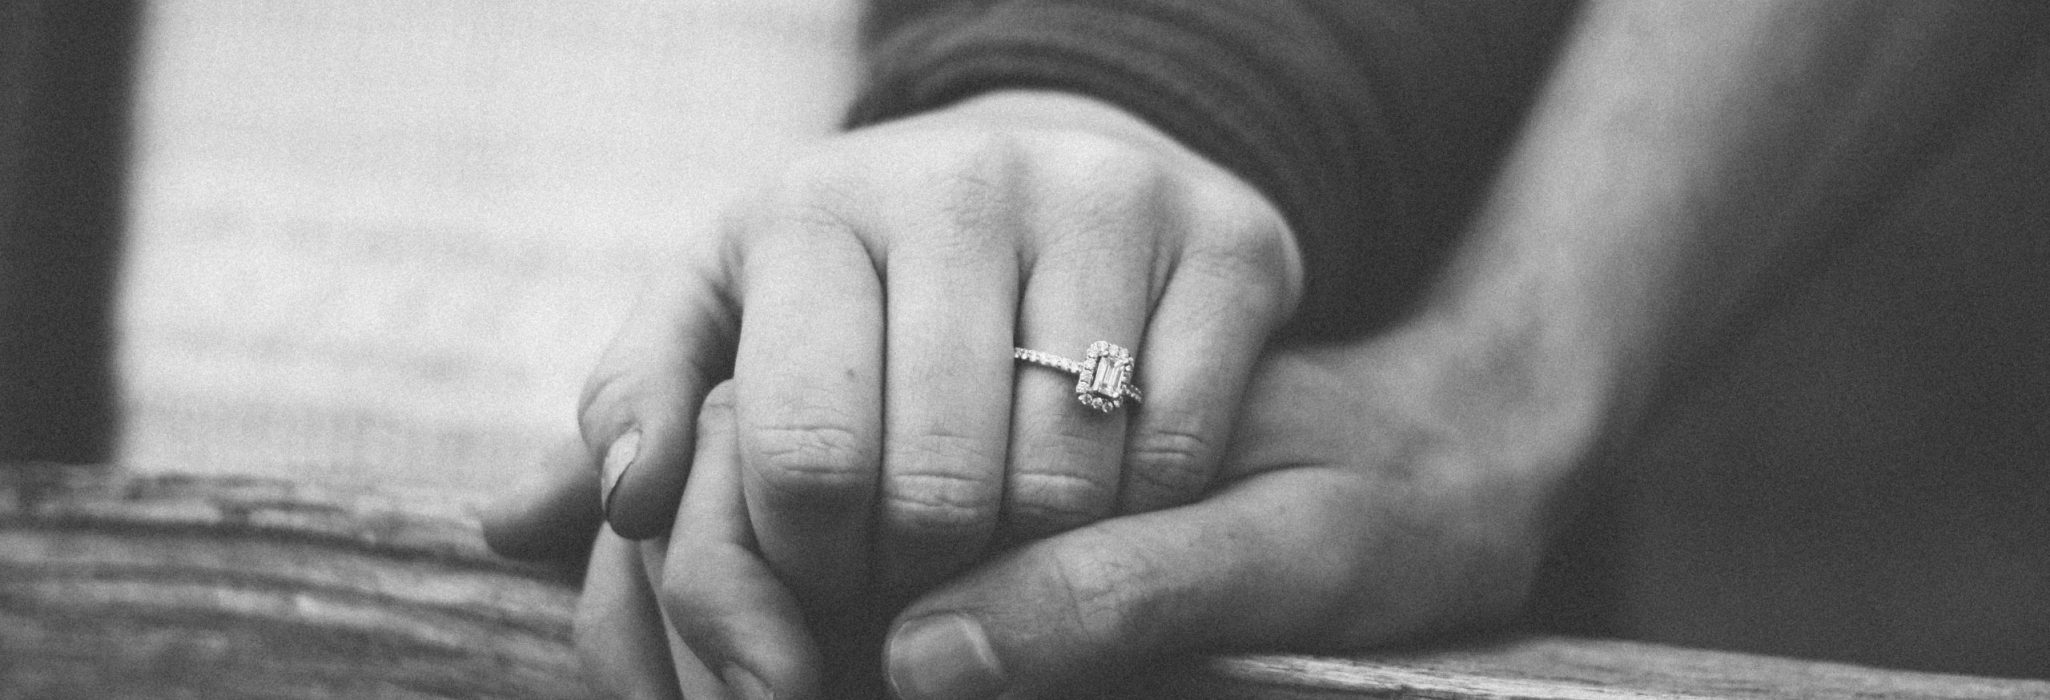 couple-holding-hands-wedding-ring